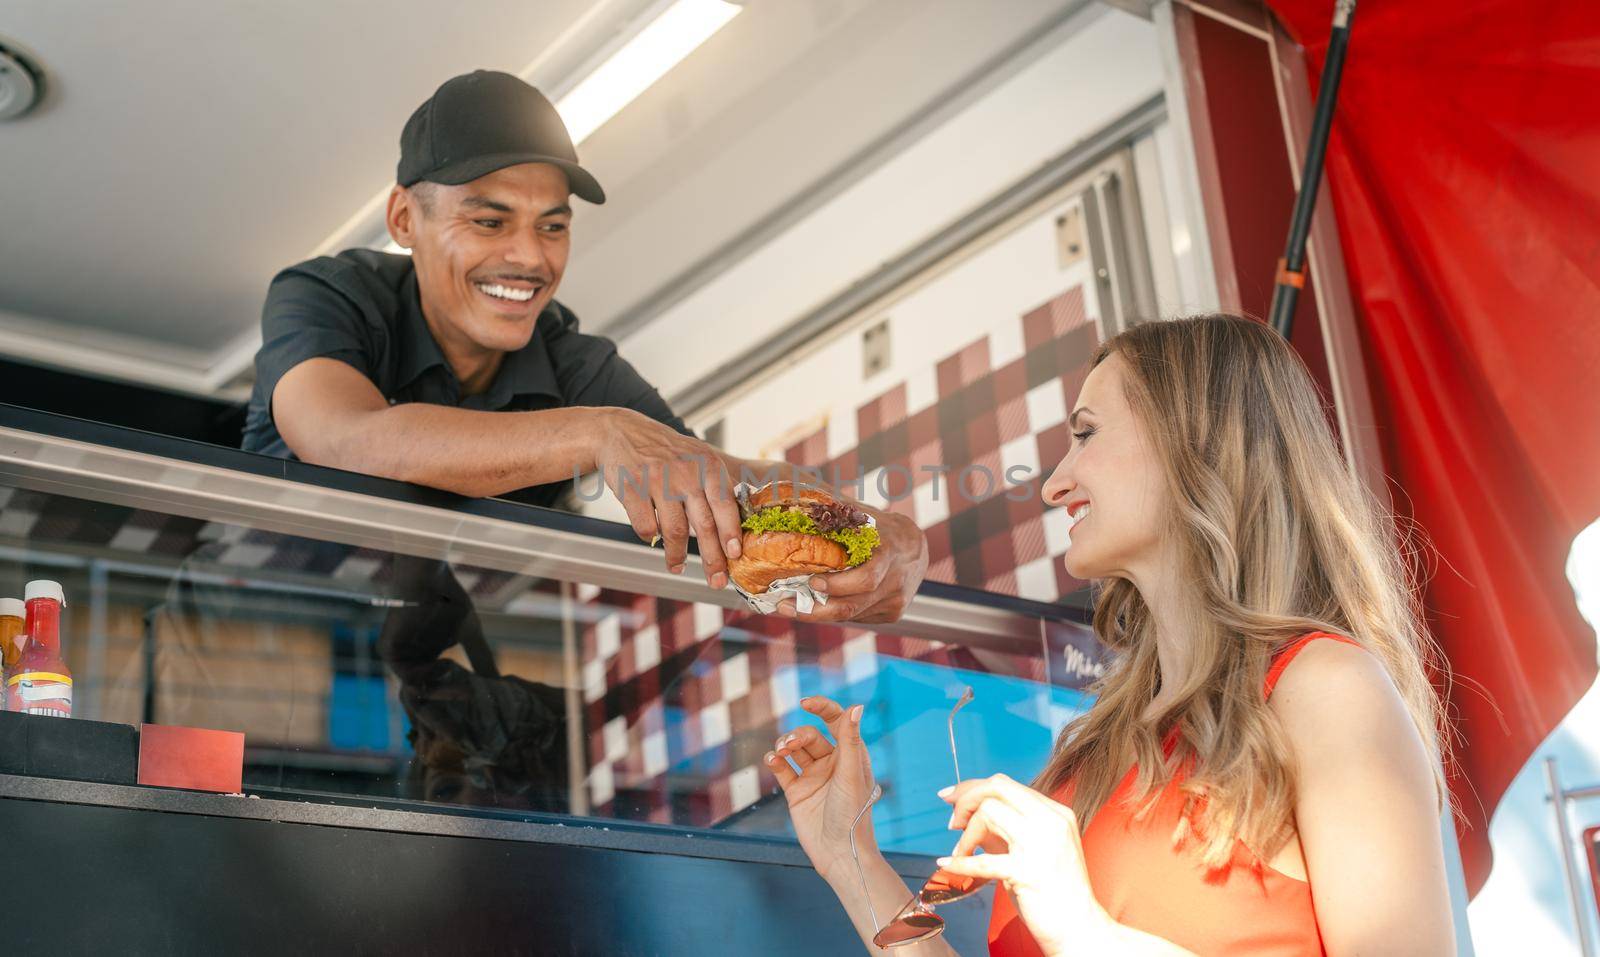 Friendly Cook in a food truck handing tasty burger over to woman customer